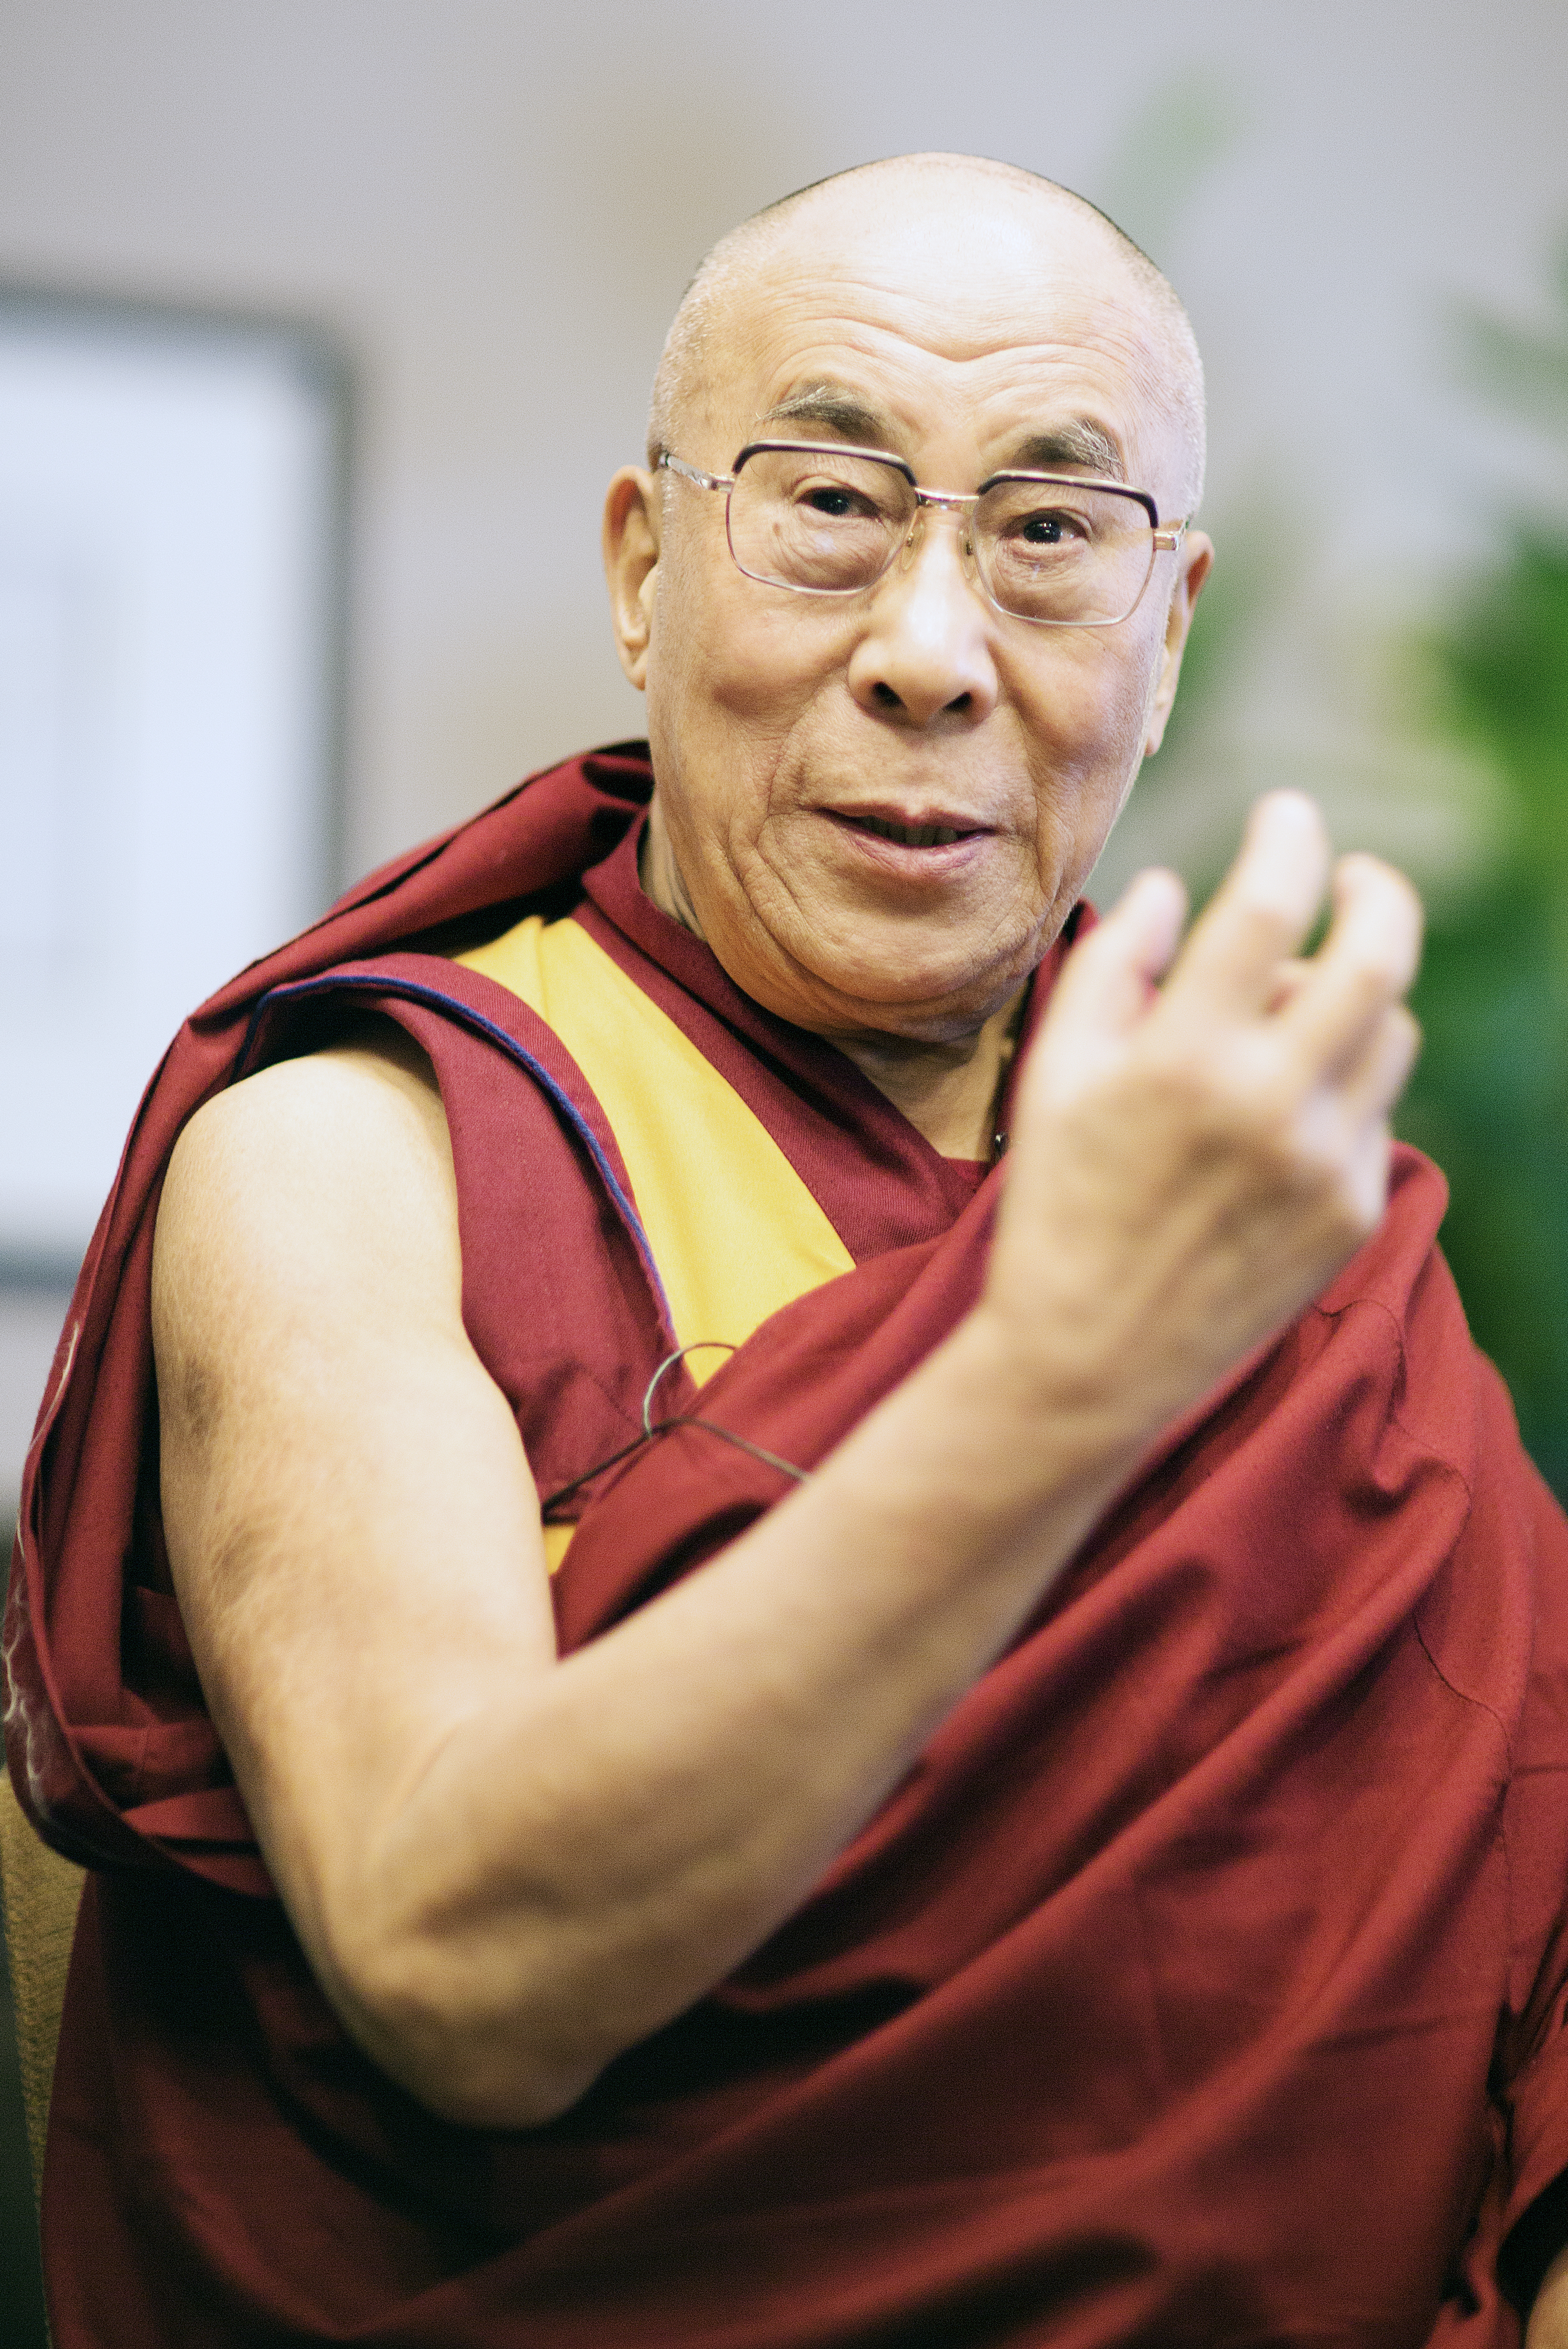 The Dalai Lama, shown speaking at MIT in October 2012. The Tibetan spiritual leader marked his 87th birthday on July 6 by opening the Dalai Lama Library and Museum at his Indian headquarters. Image courtesy of Wikimedia Commons, photo credit Christopher Michel (Cmichel67). Shared under the Creative Commons Attribution-Share Alike 4.0 International license.